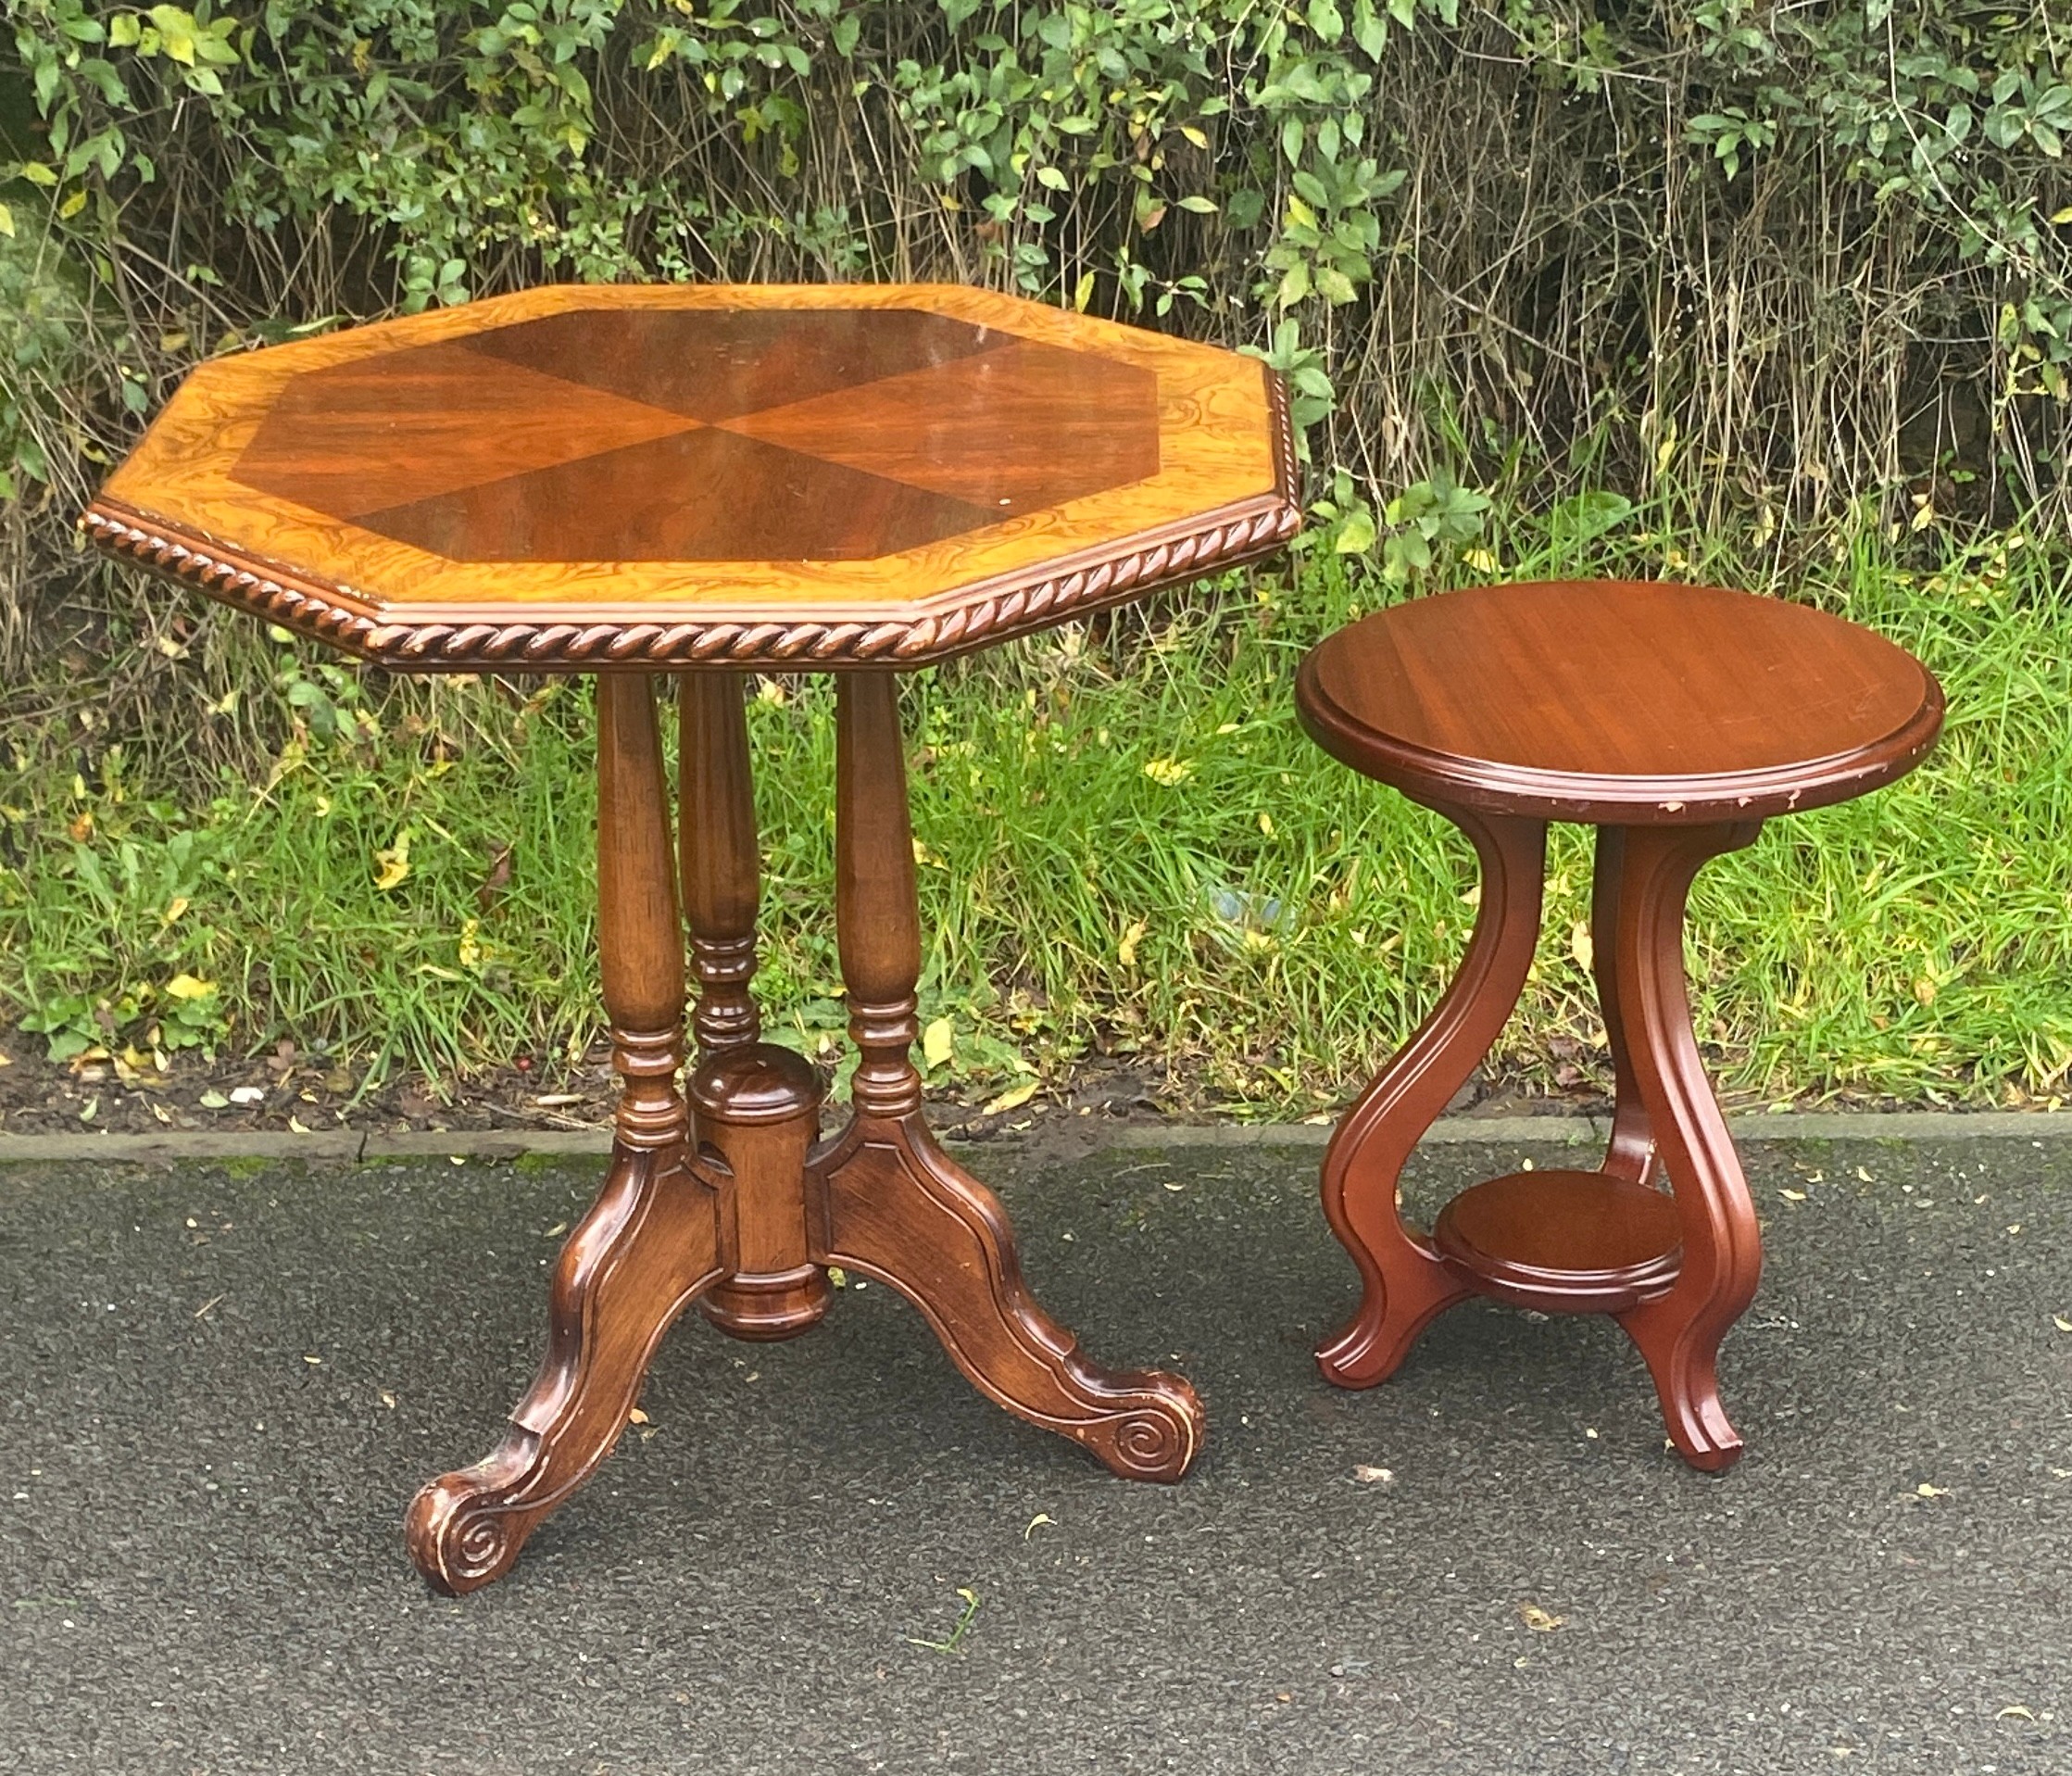 2 Vintage occasional tables, largest measures approximately 26 inches tall 26.5 inches wide